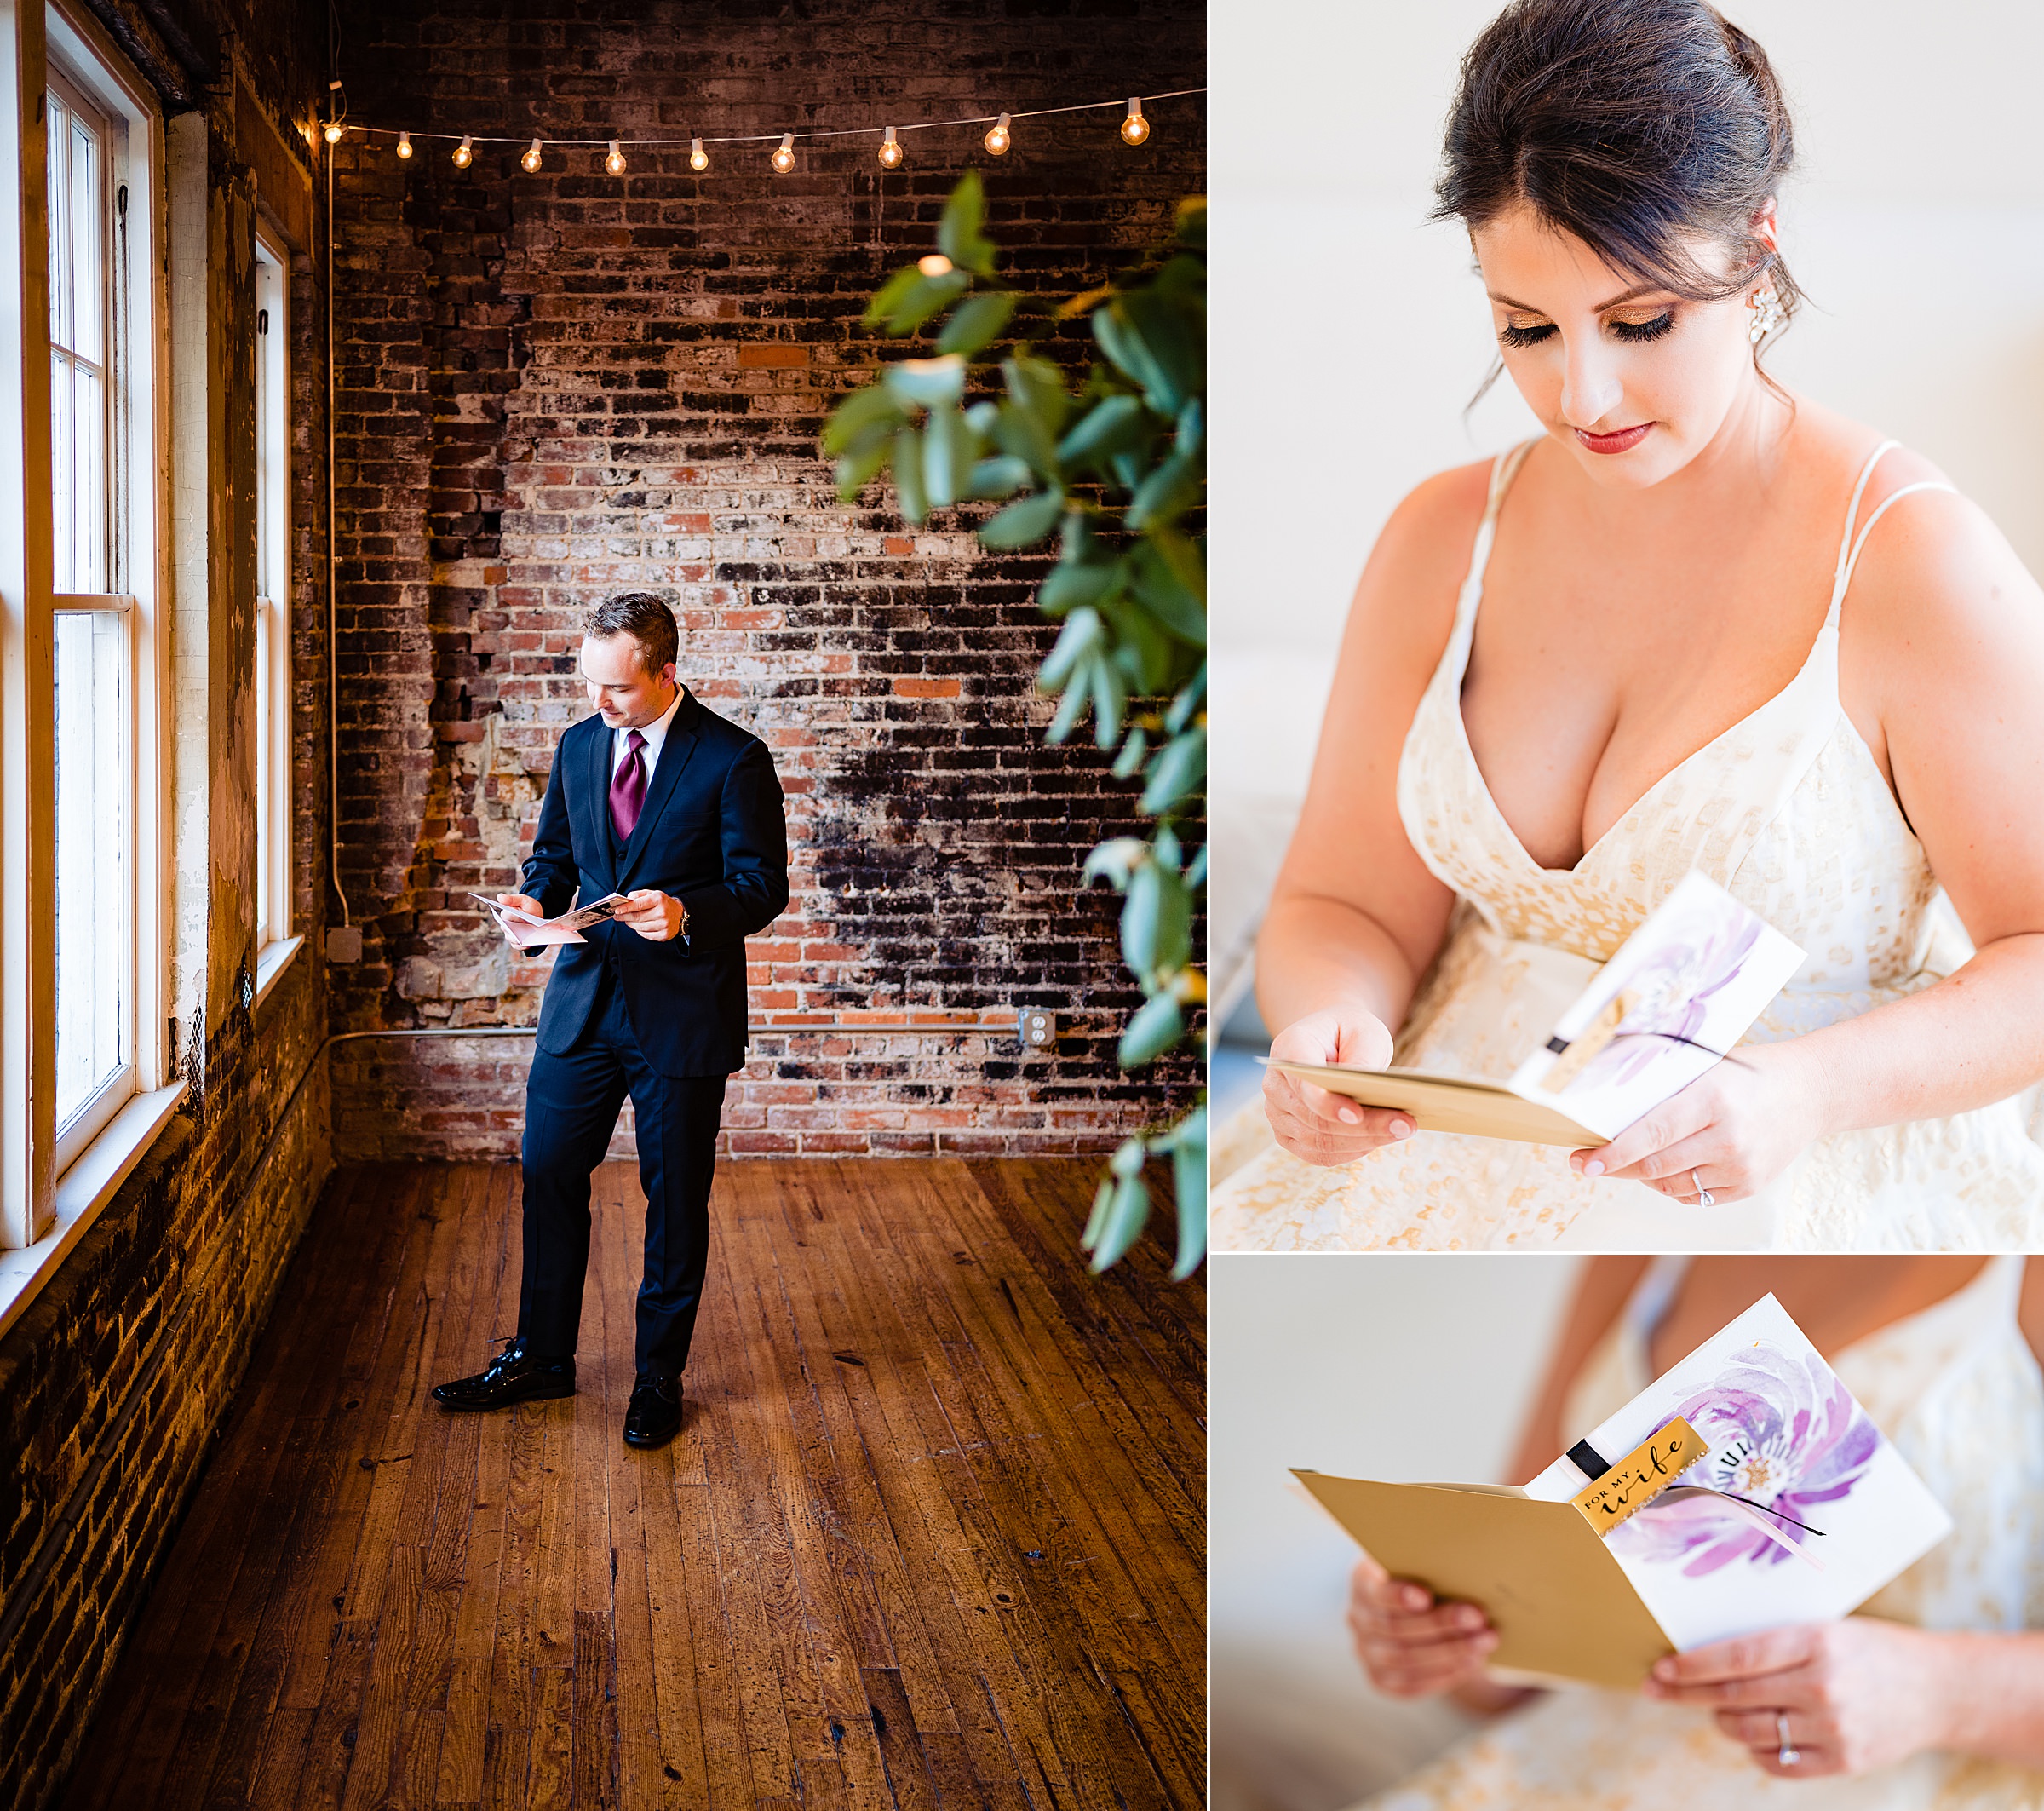 Collage of wedding day images at The Stockroom in Raleigh: In one, the groom reads a letter from the bride. In the others, the bride reads a letter from the groom | kivusandcamera.com